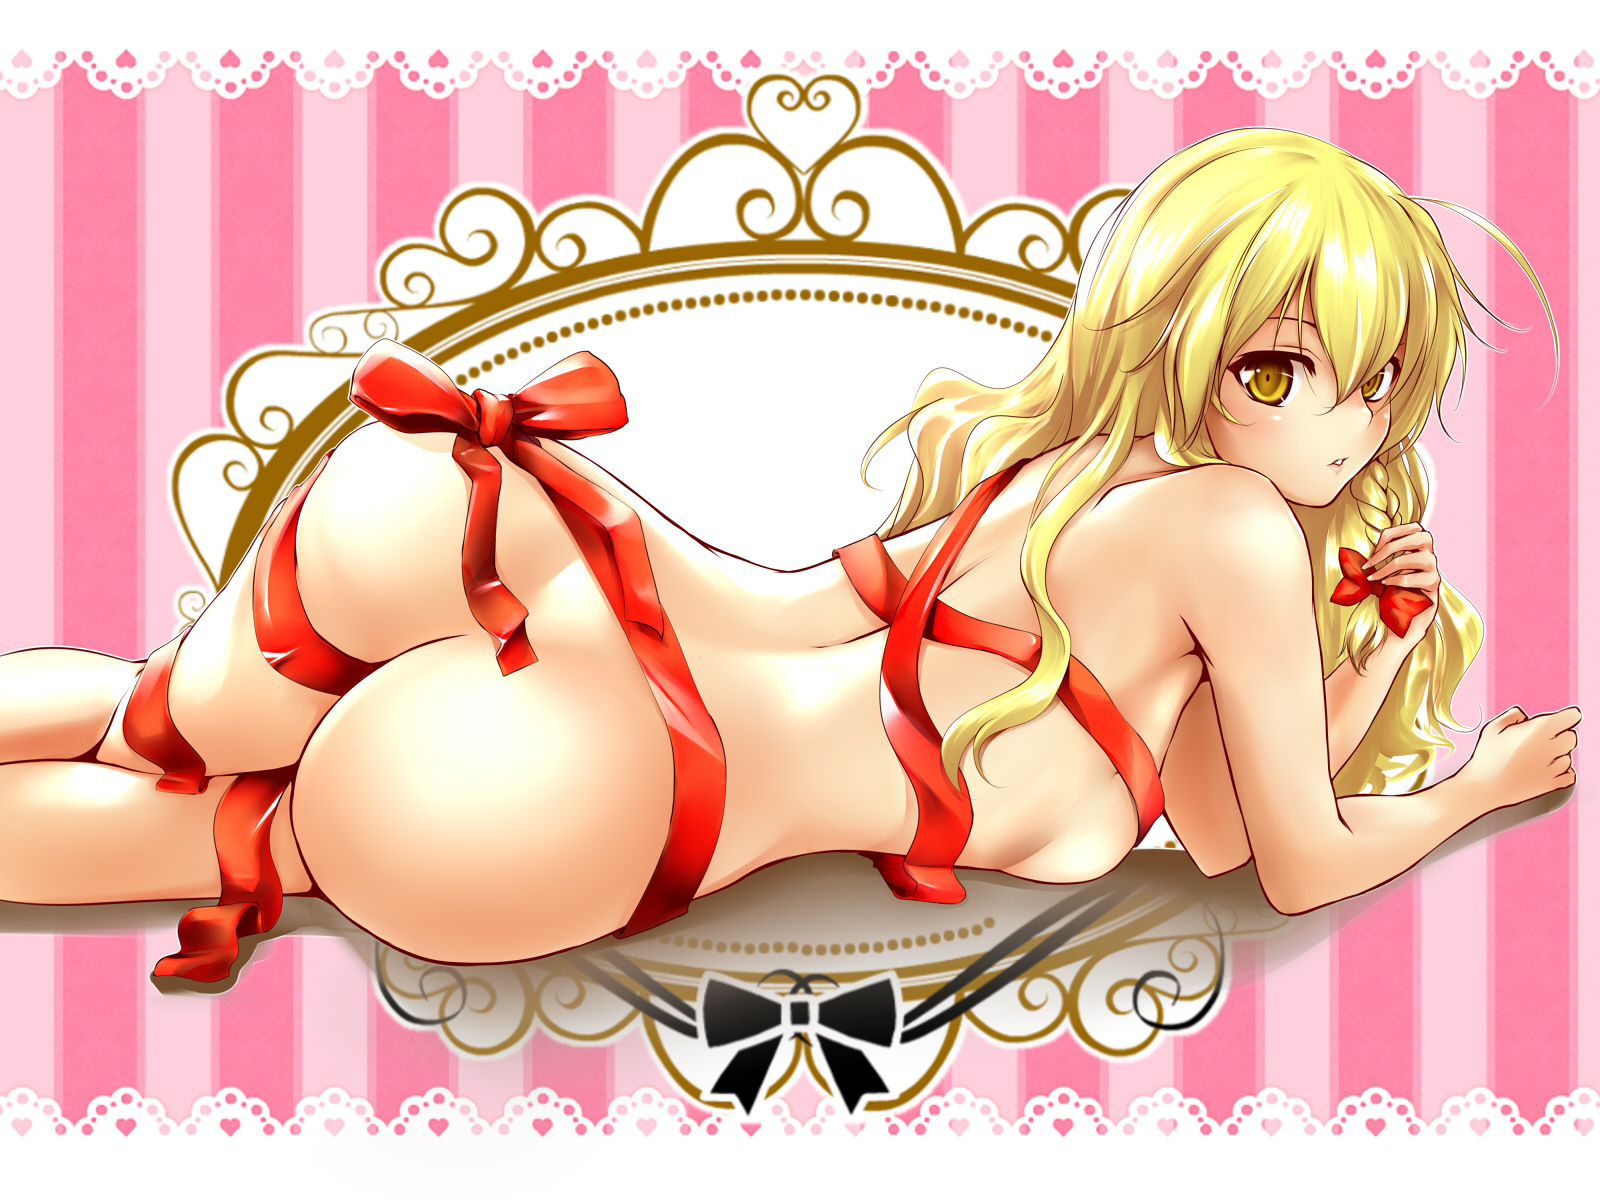 [39 pieces] A Christmas present is a nude ribbon eroticism image of the girls wrapped for って feeling me! 35